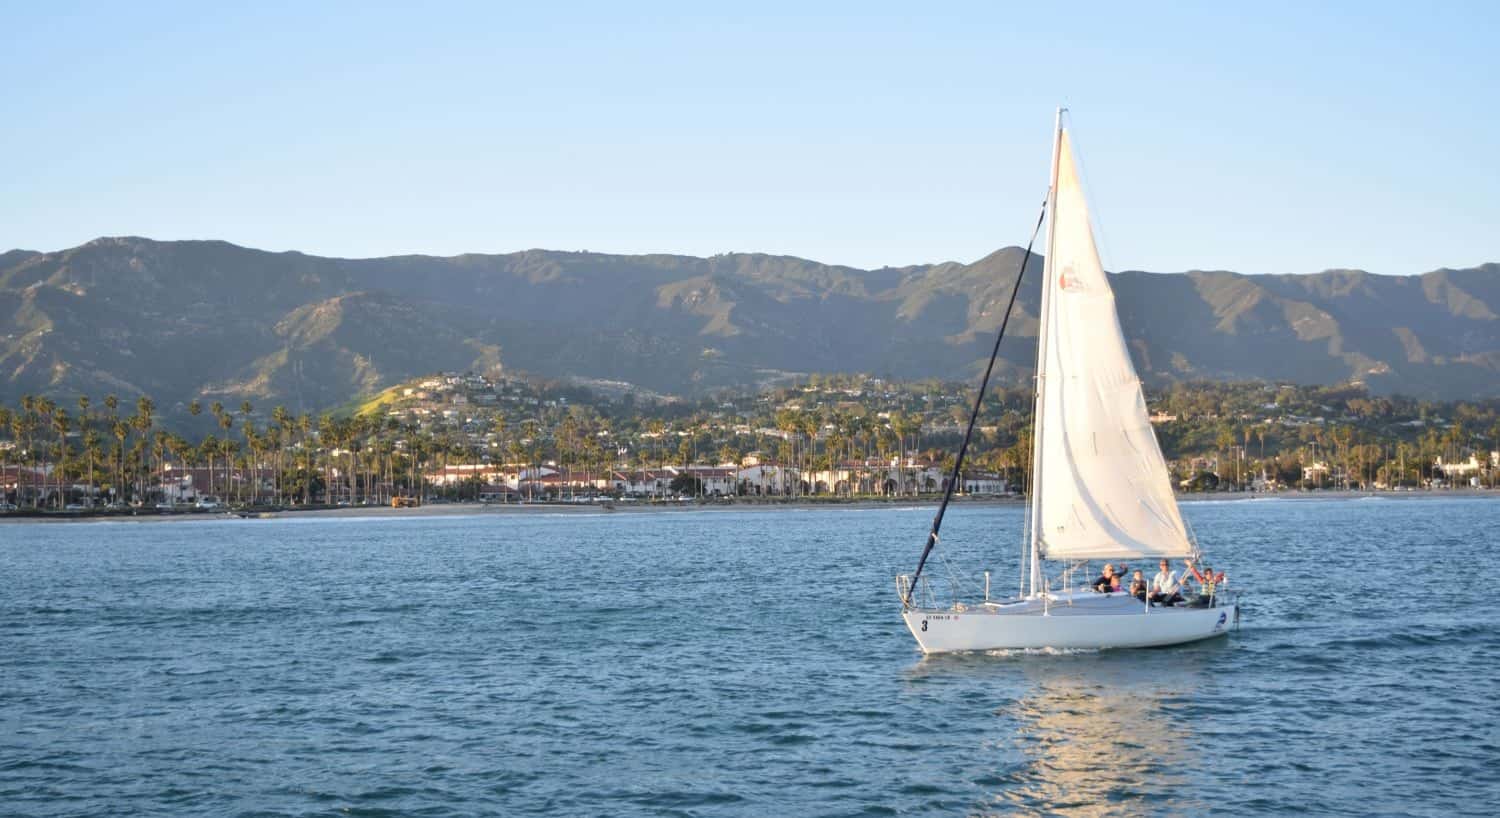 Sailboat sailing in the water with Santa Barbara and mountains in the background